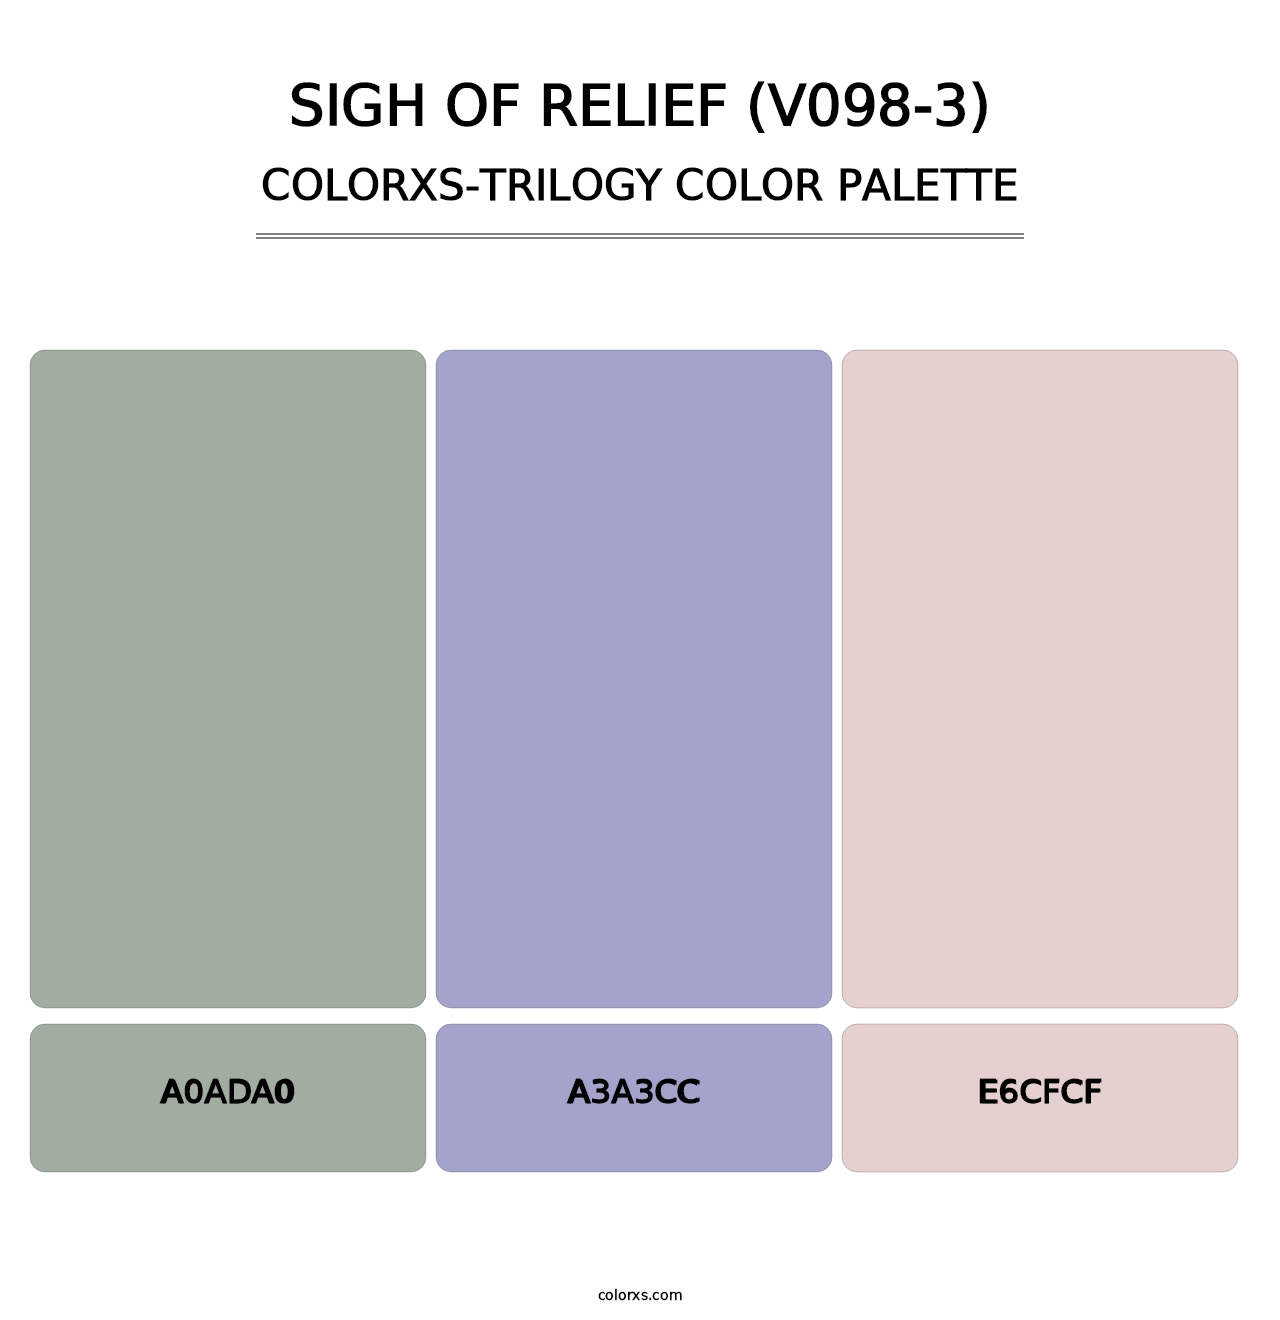 Sigh of Relief (V098-3) - Colorxs Trilogy Palette